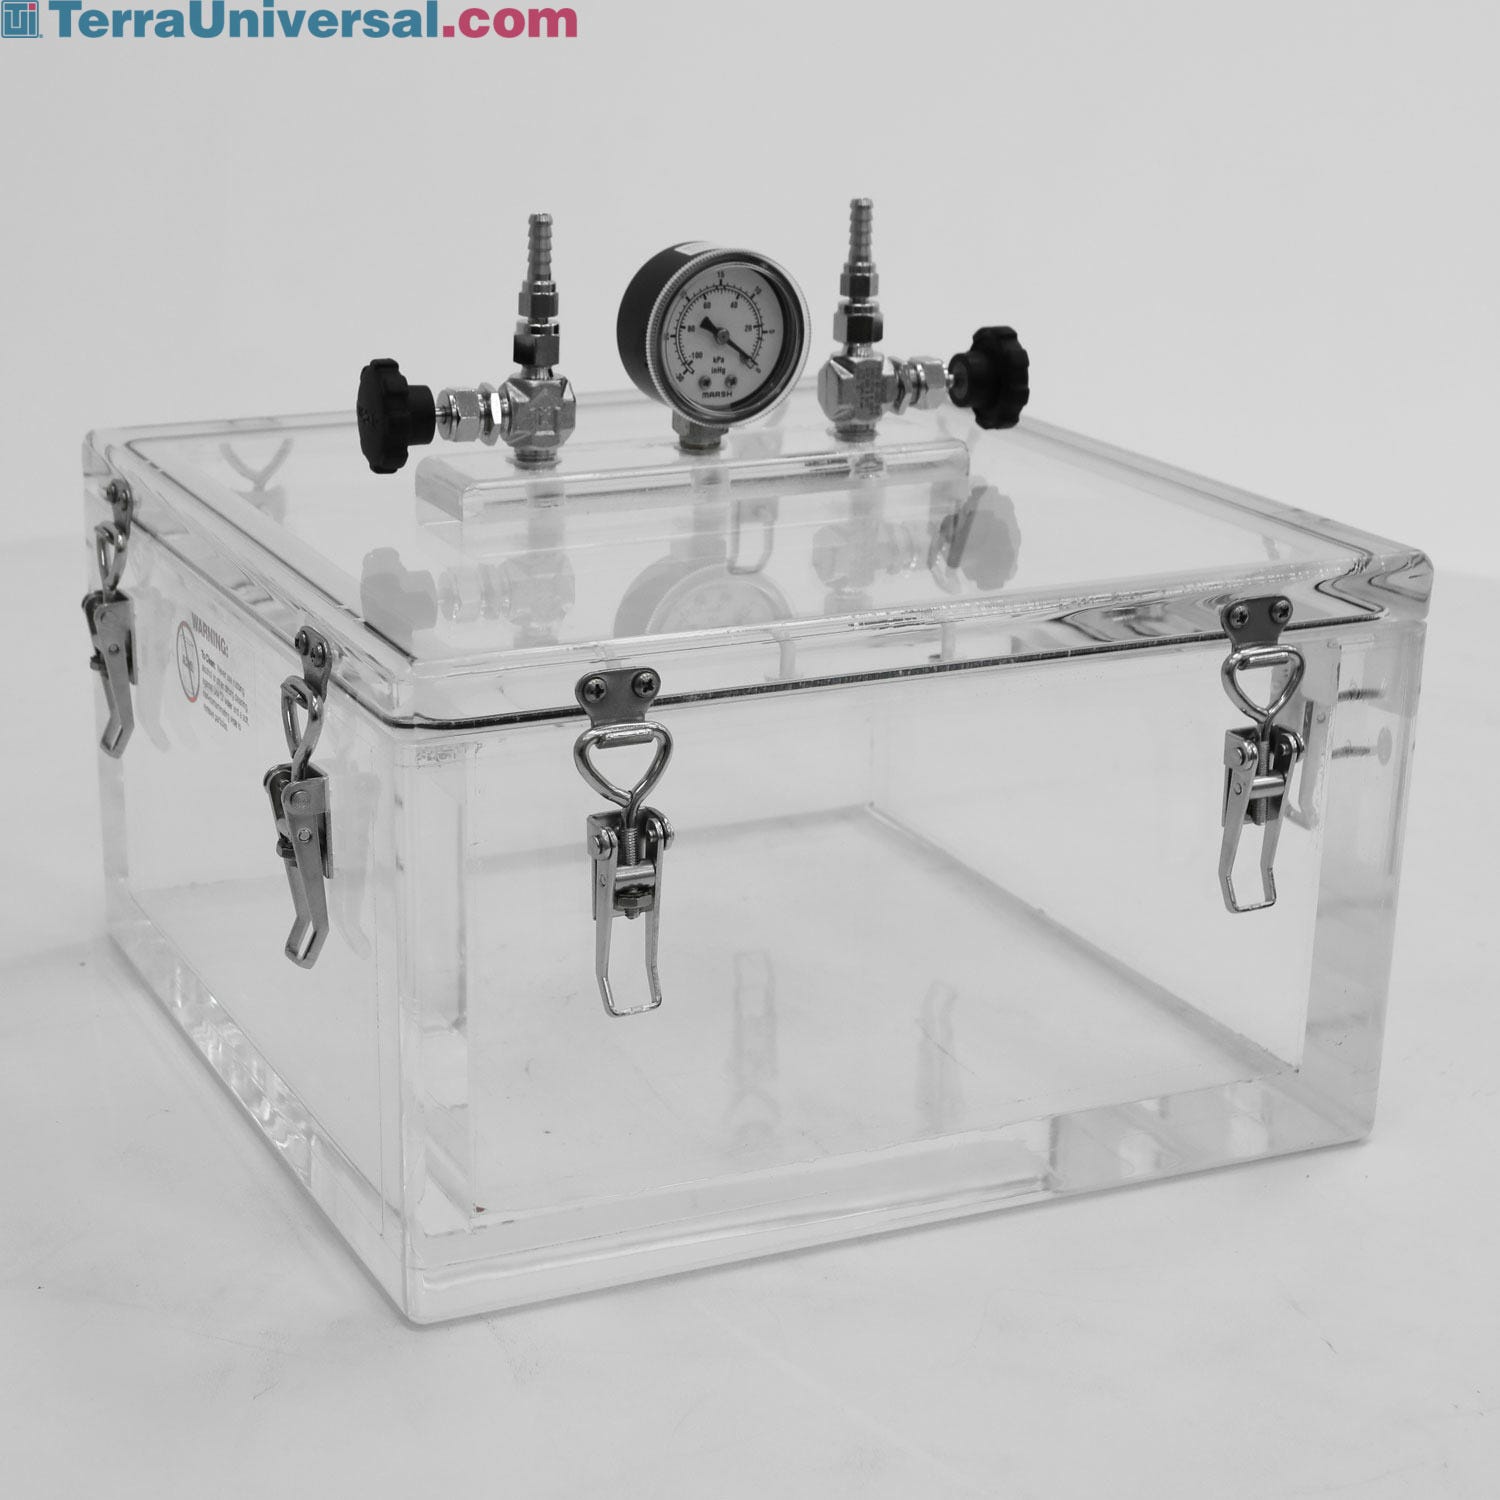 Air/Water Tight Clear Acrylic Box w/ Removable White Acrylic Base